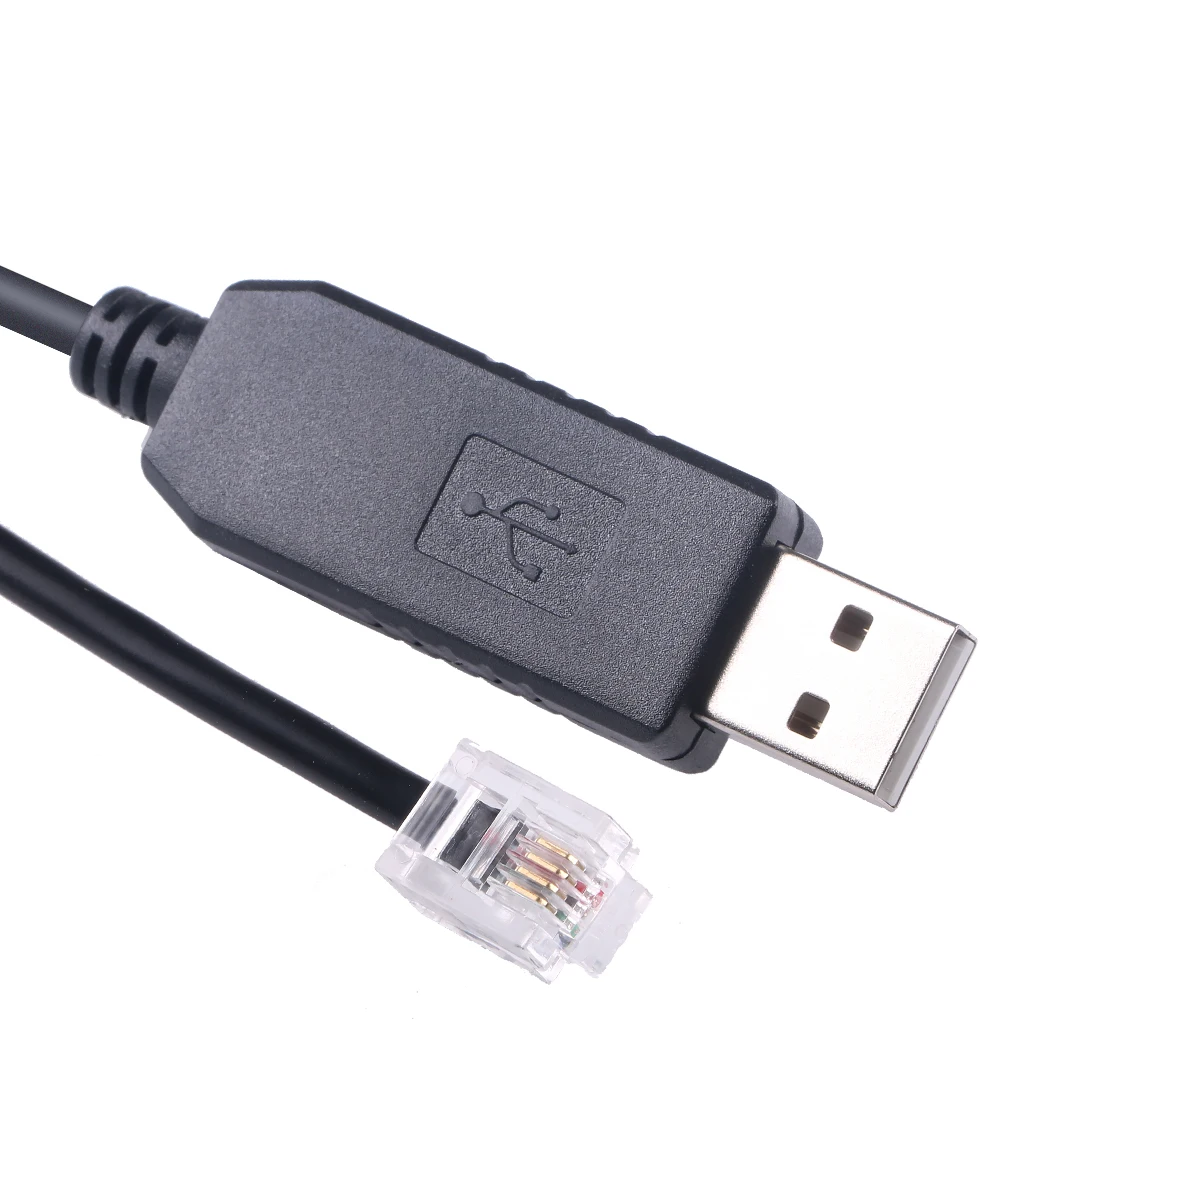 

FTDI USB to RJ11 6P4C Hand Control to Link RS232 Serial Converter Cable for Celestron Nexstar EQ6 Synscan